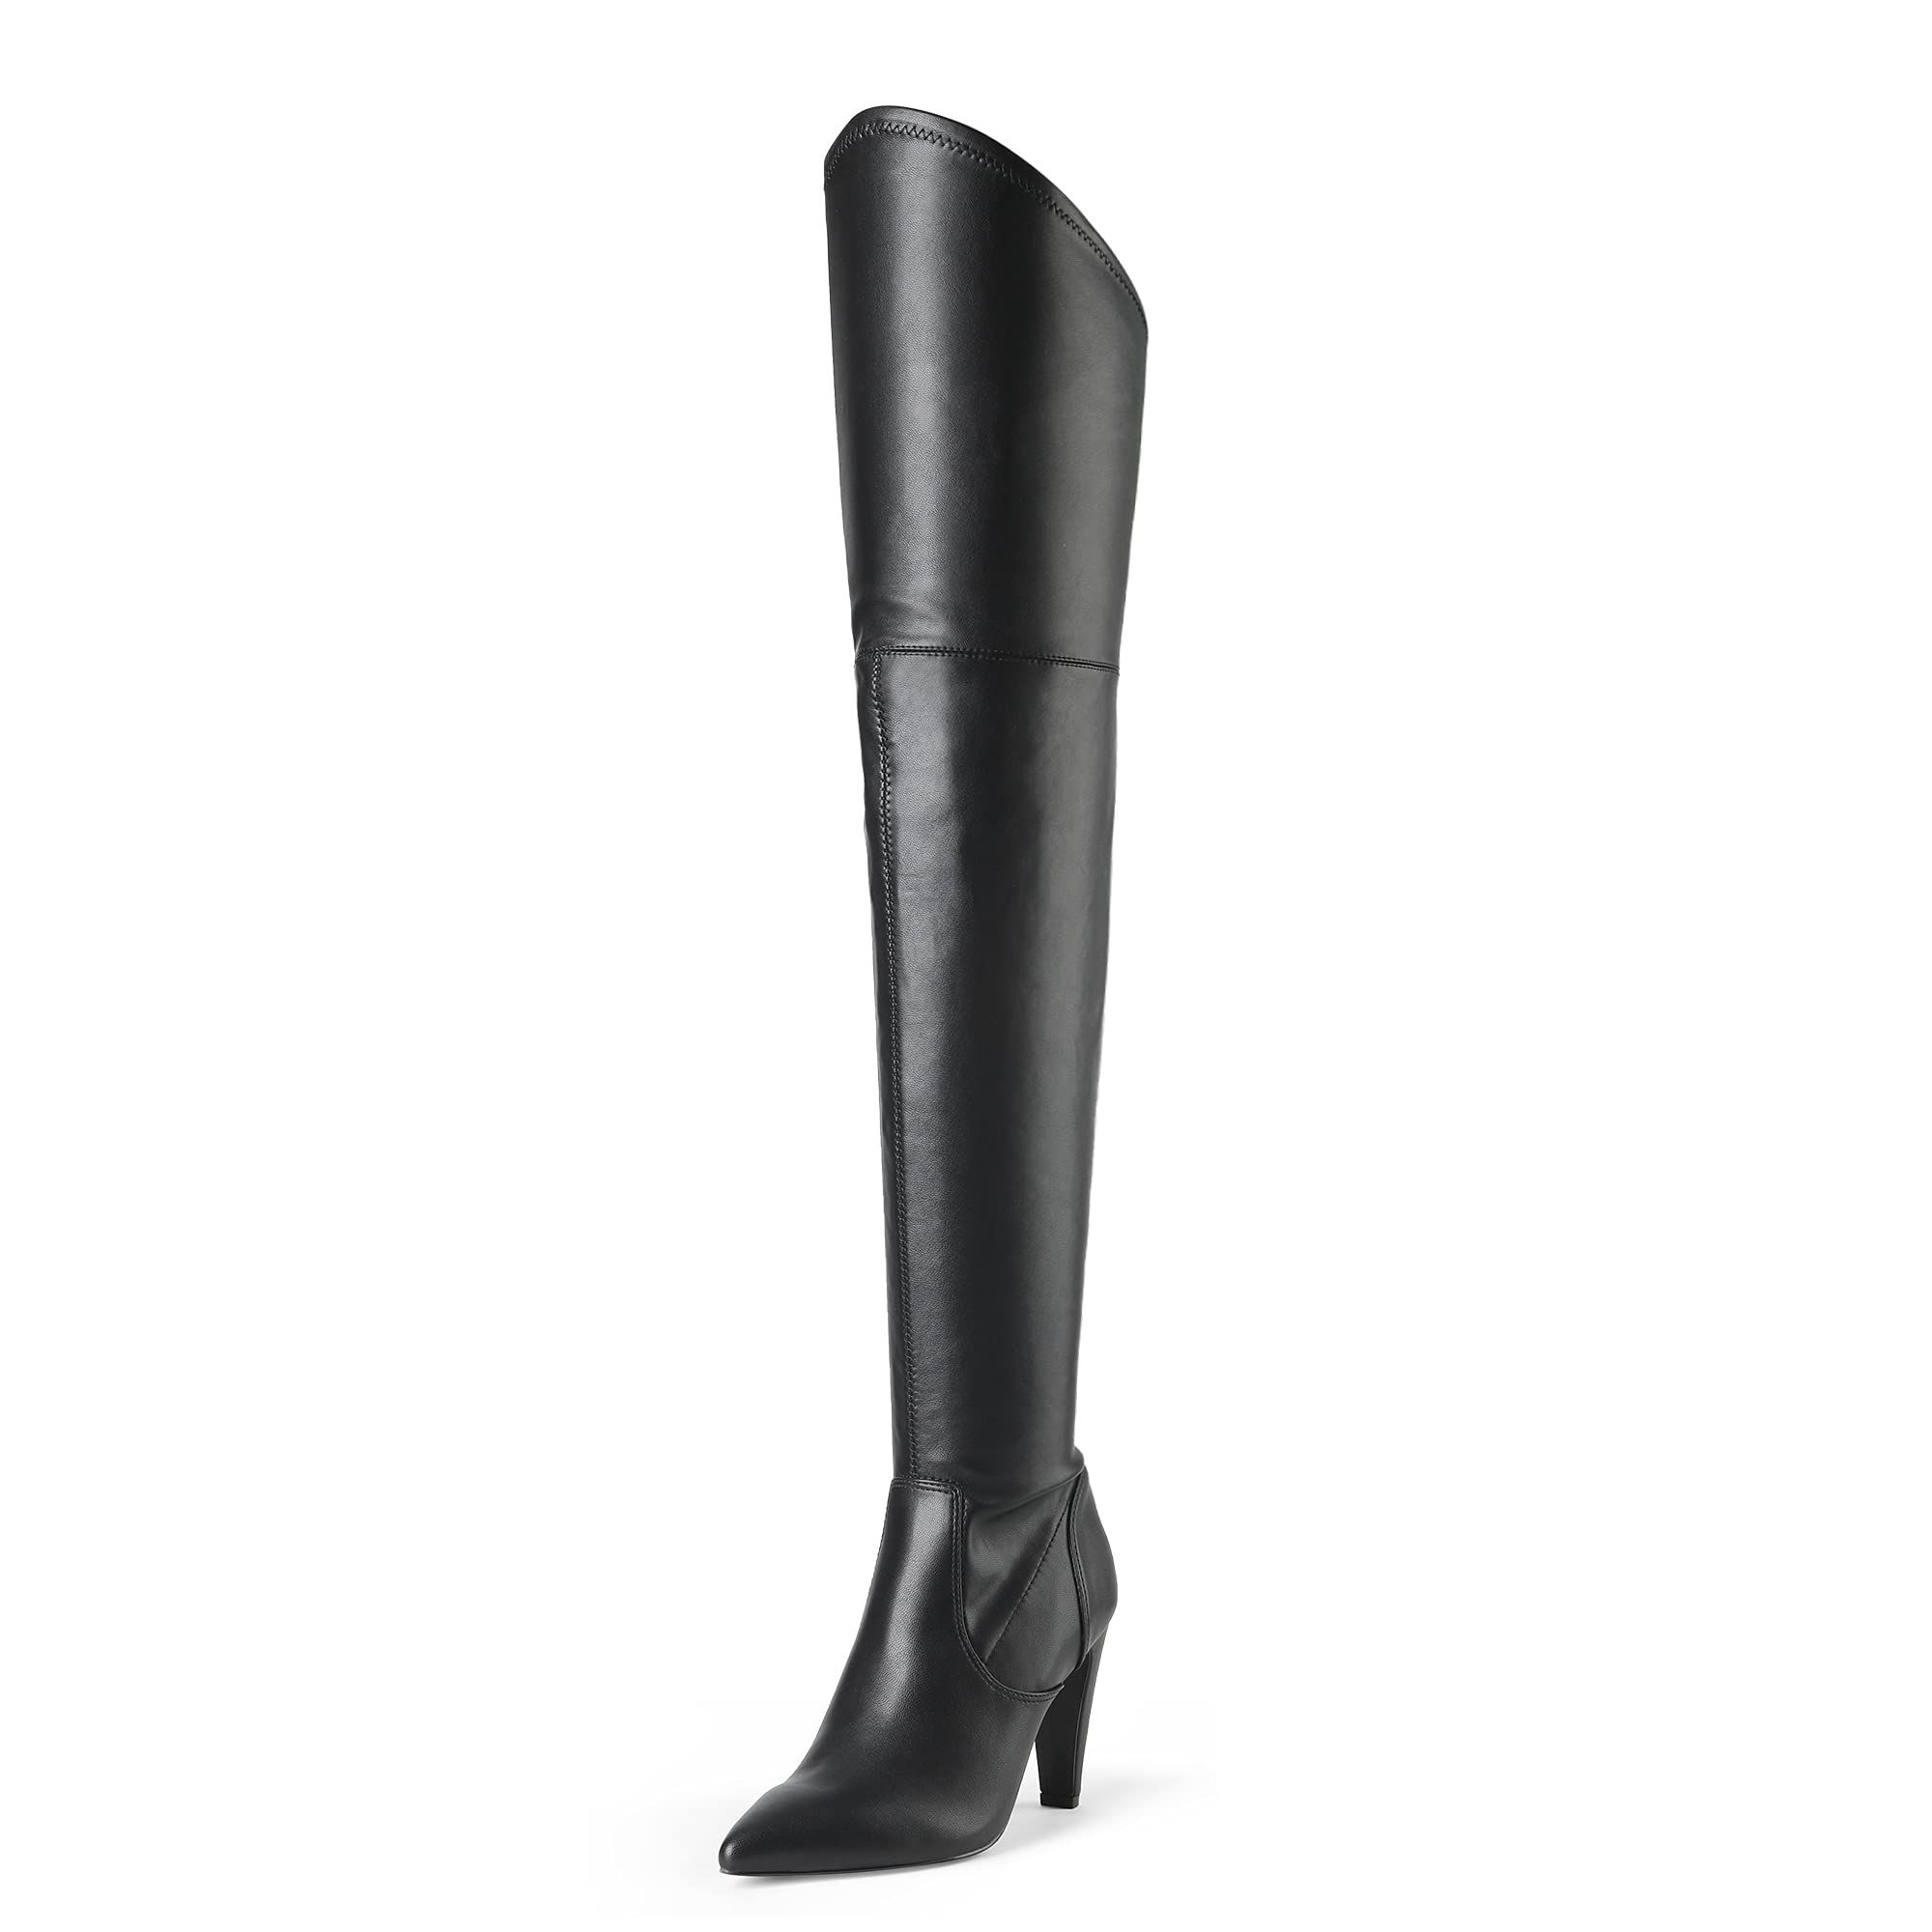 Buy Over The Knee Block Heel Boots (Numeric_4) Black at Amazon.in